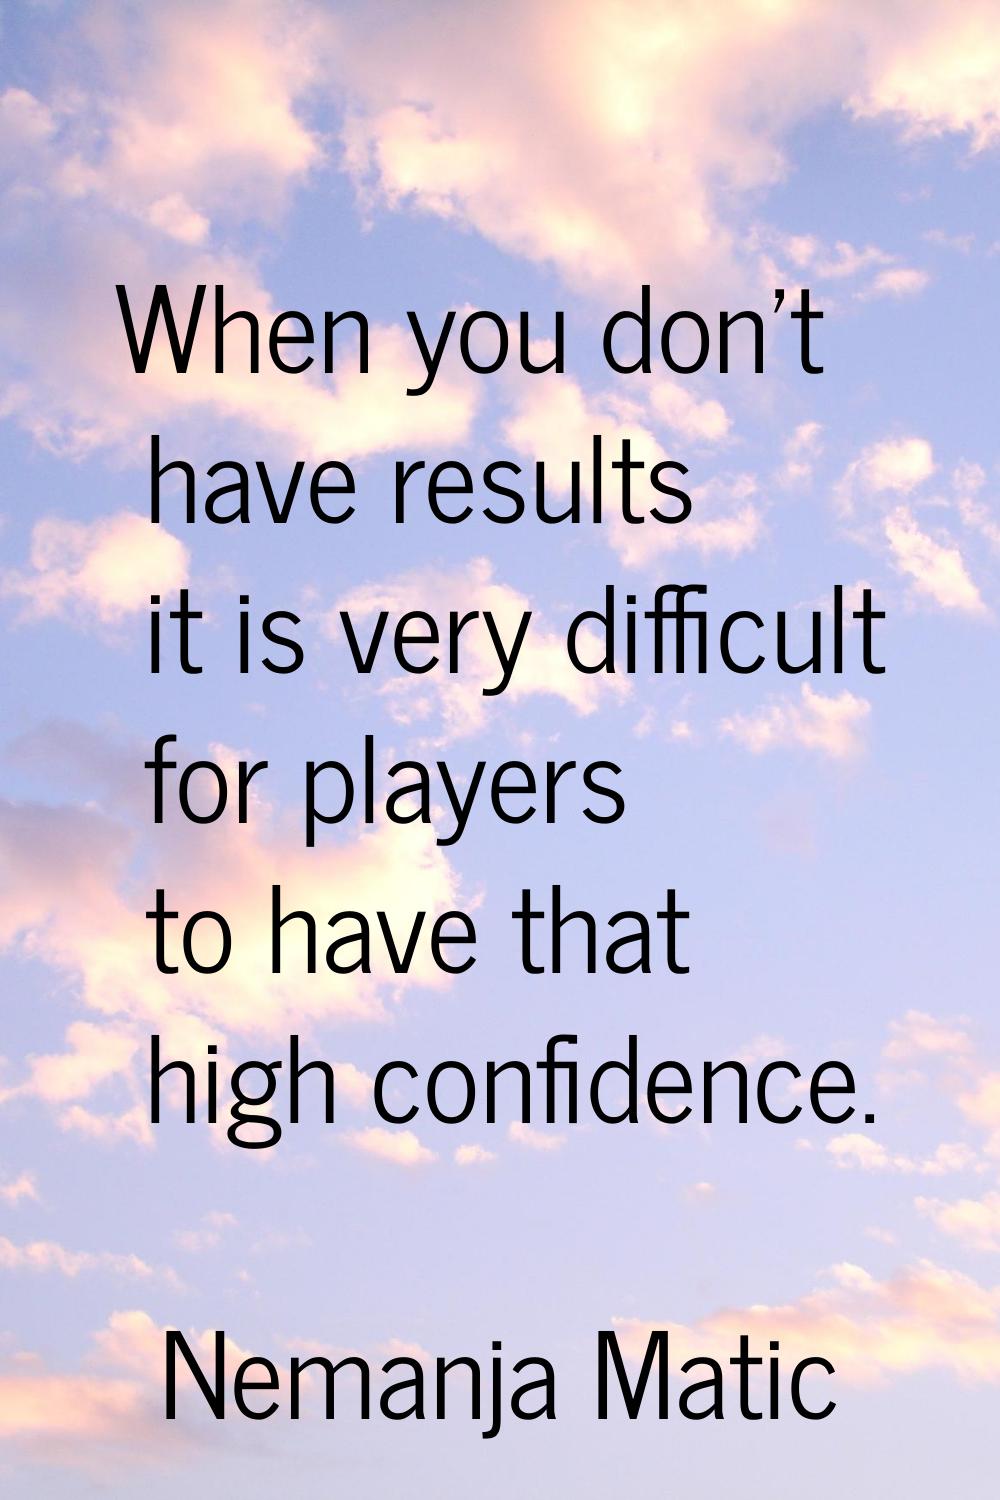 When you don't have results it is very difficult for players to have that high confidence.